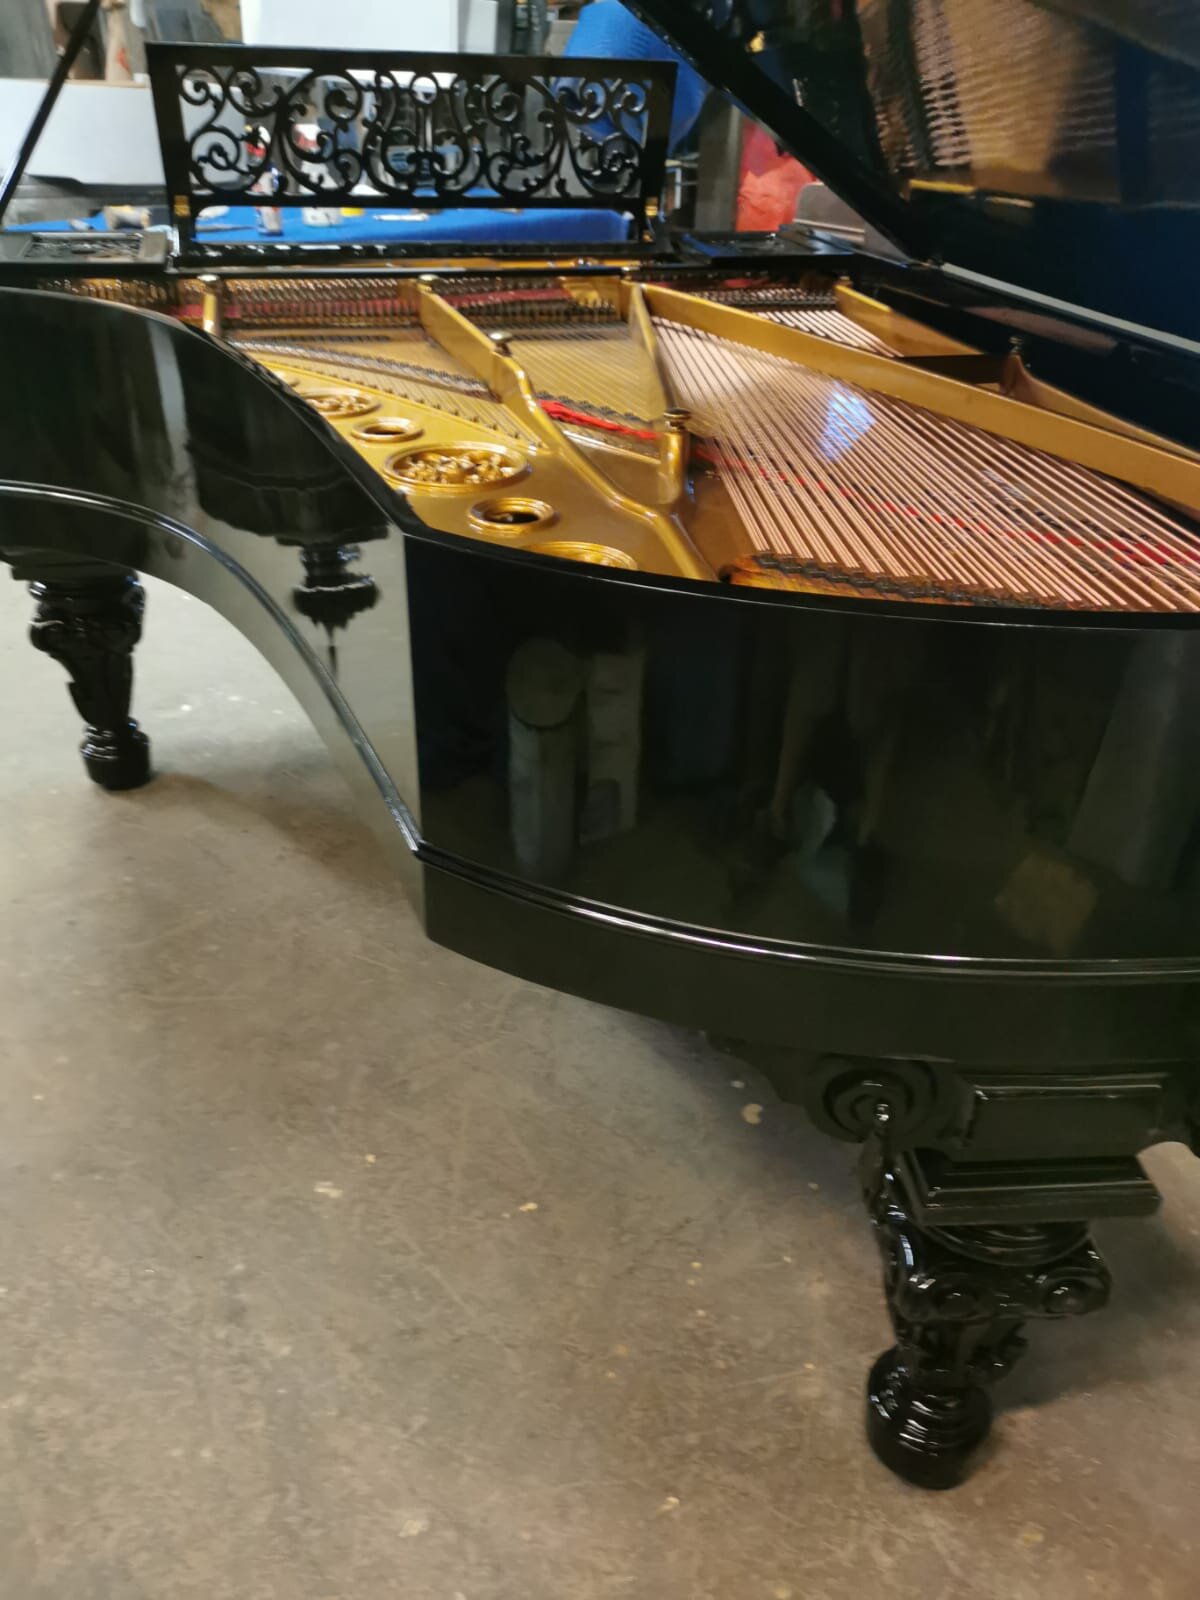 Chickering piano for sale4.jpeg